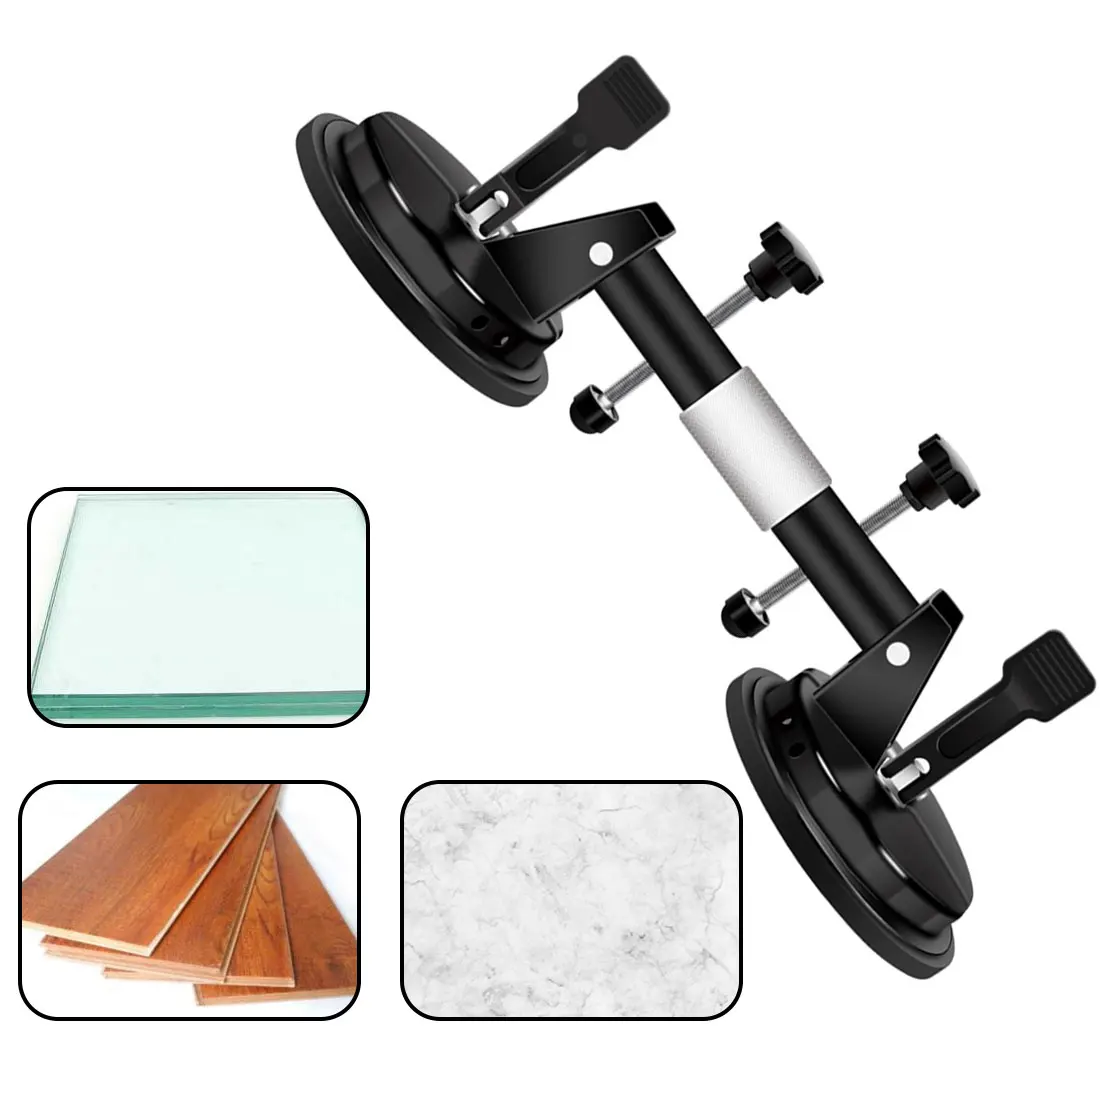 

Adjustable Suction Cup Stone Seam Setter for Pulling and Aligning Tiles Flat Surfaces Stone Seam Setter Building Lifting Tools